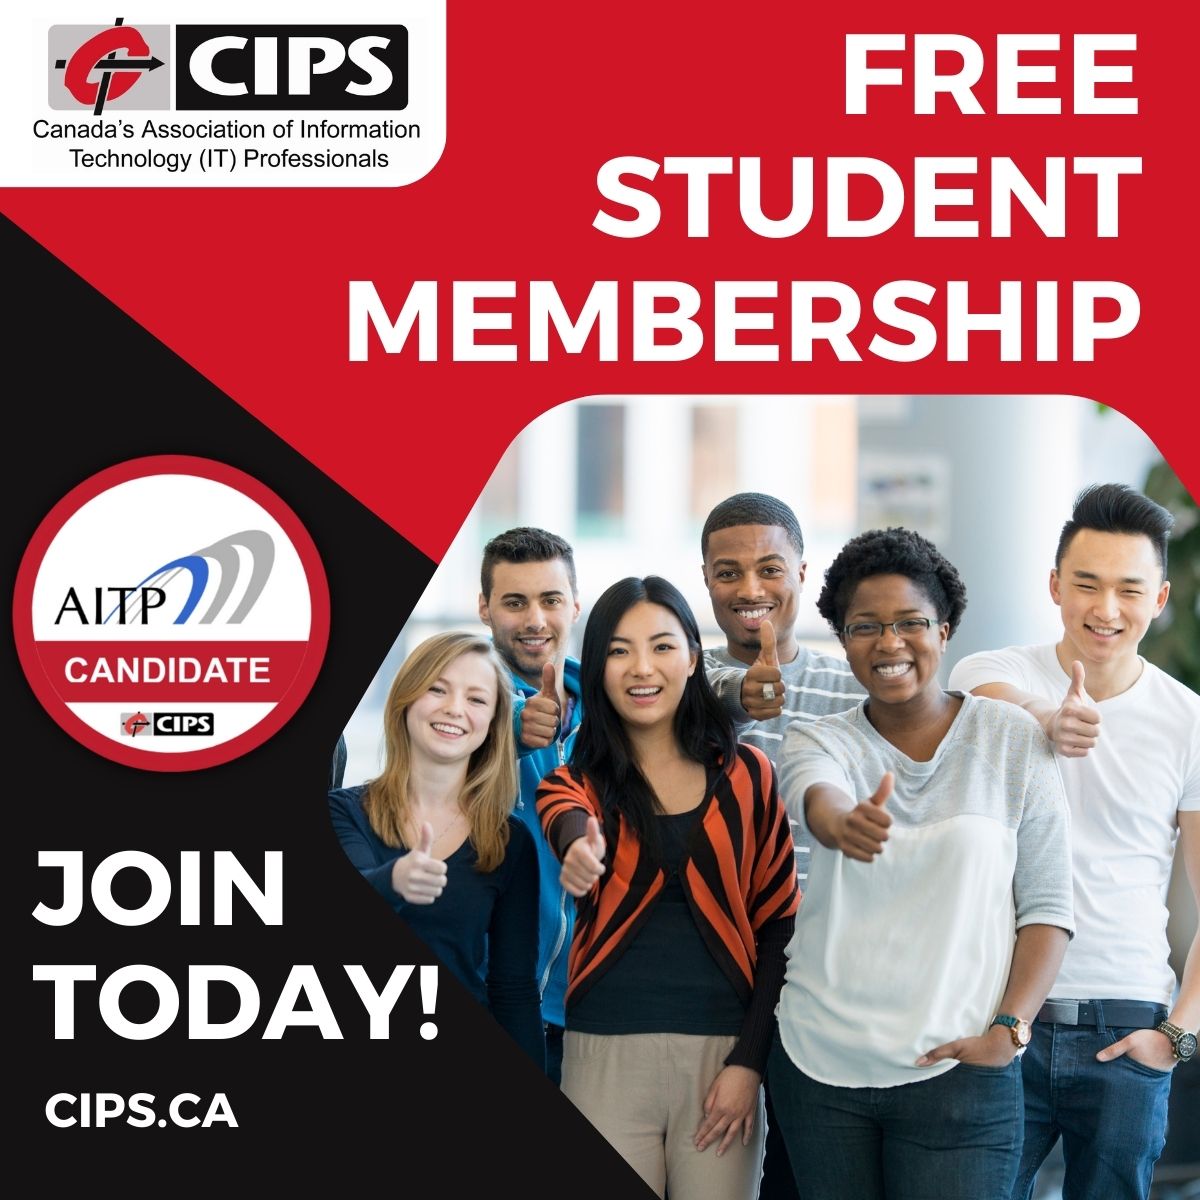 CIPS – Canada’s Association of Information Technology Professionals